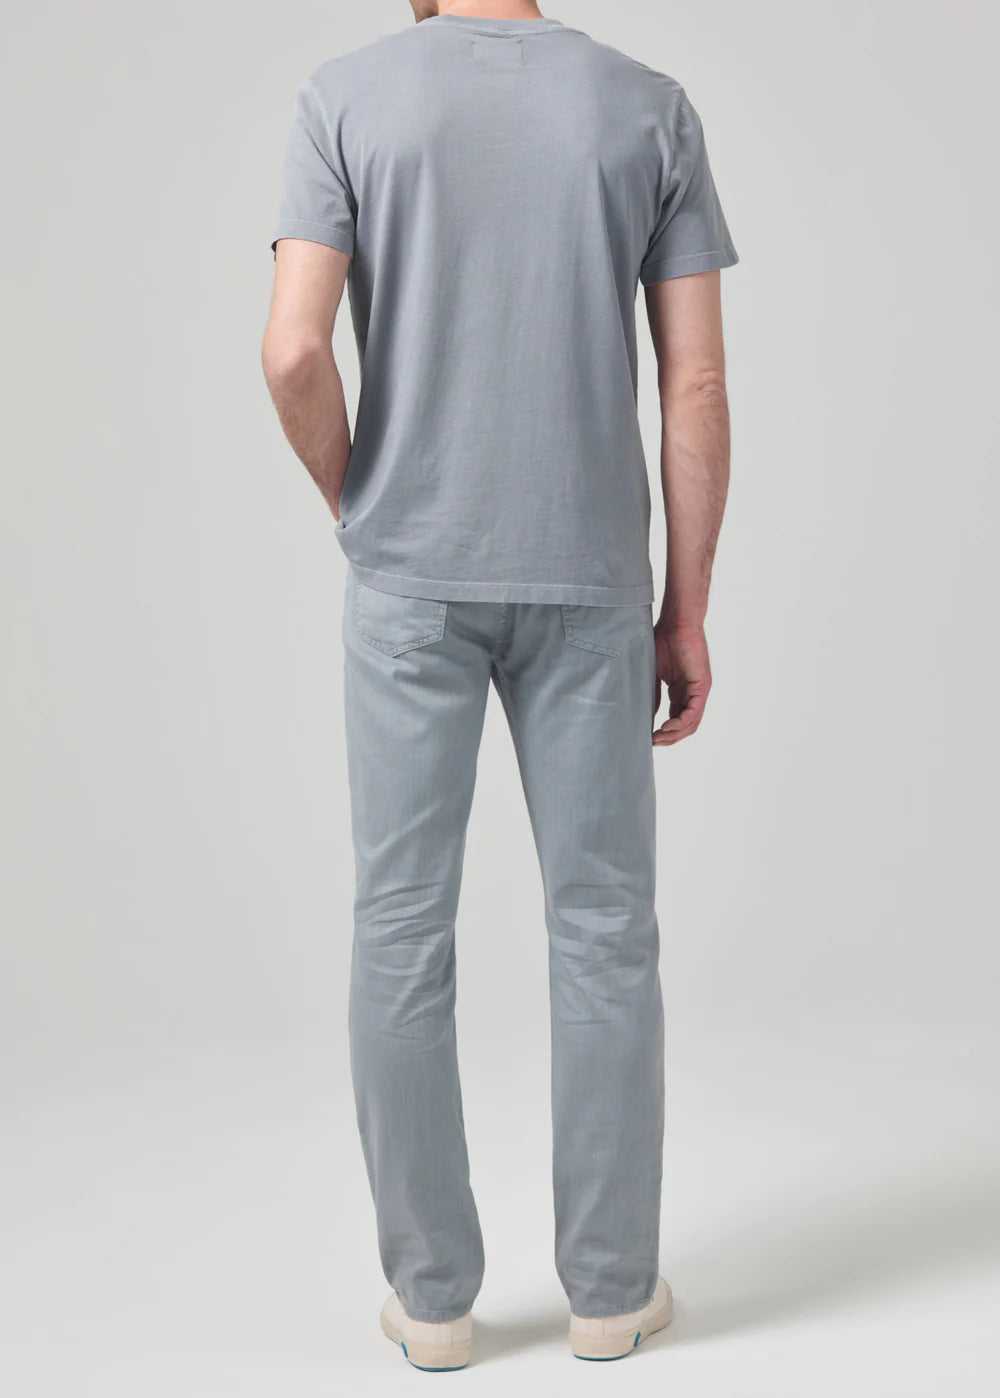 Back view of the Citizens Of Humanity washed out blue grey Gage Slim Straight Stretch Linen men's pants